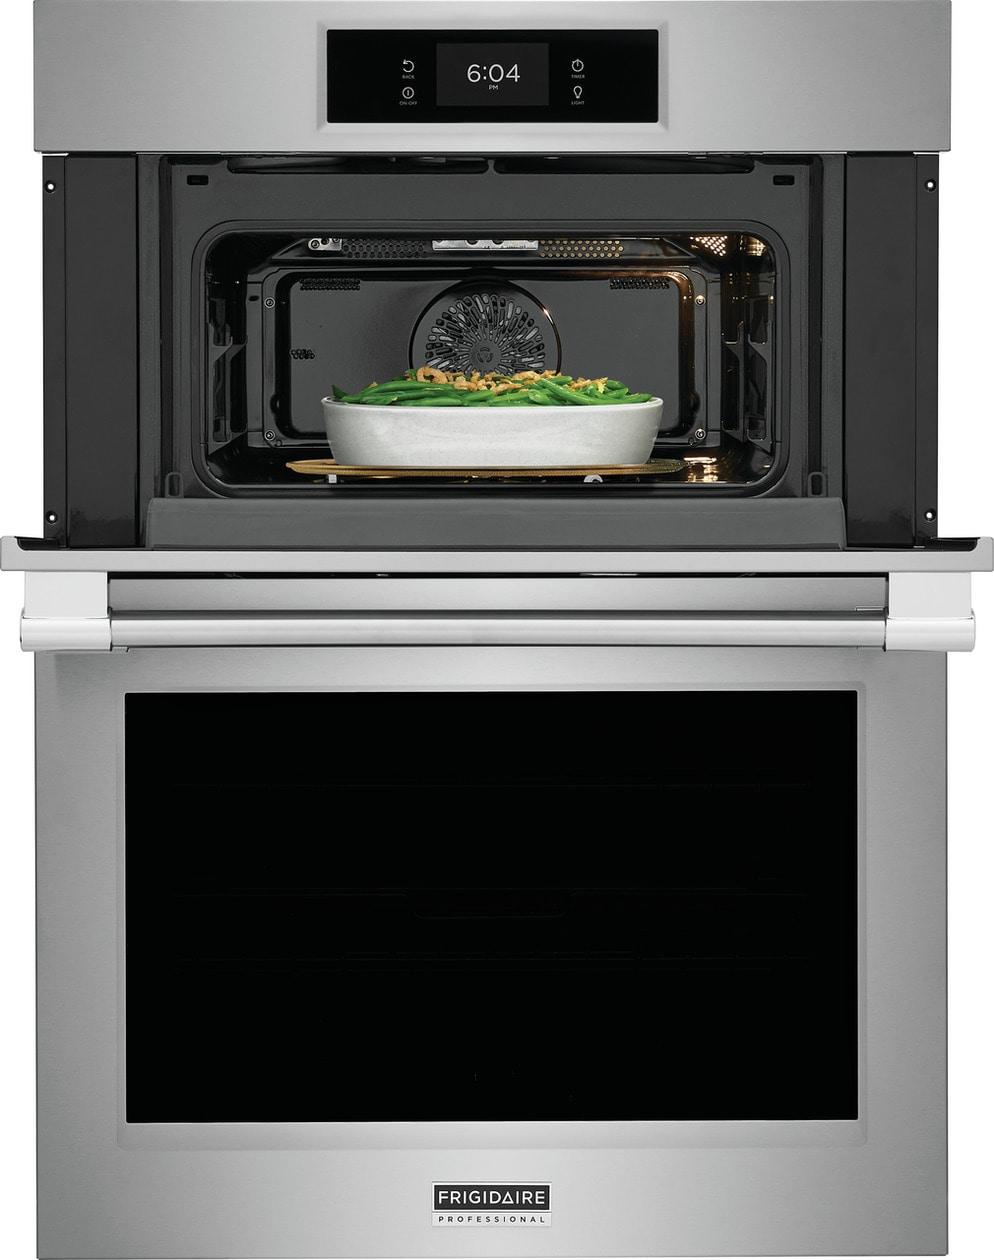 Frigidaire Professional 30" Microwave Combination Oven with Total Convection